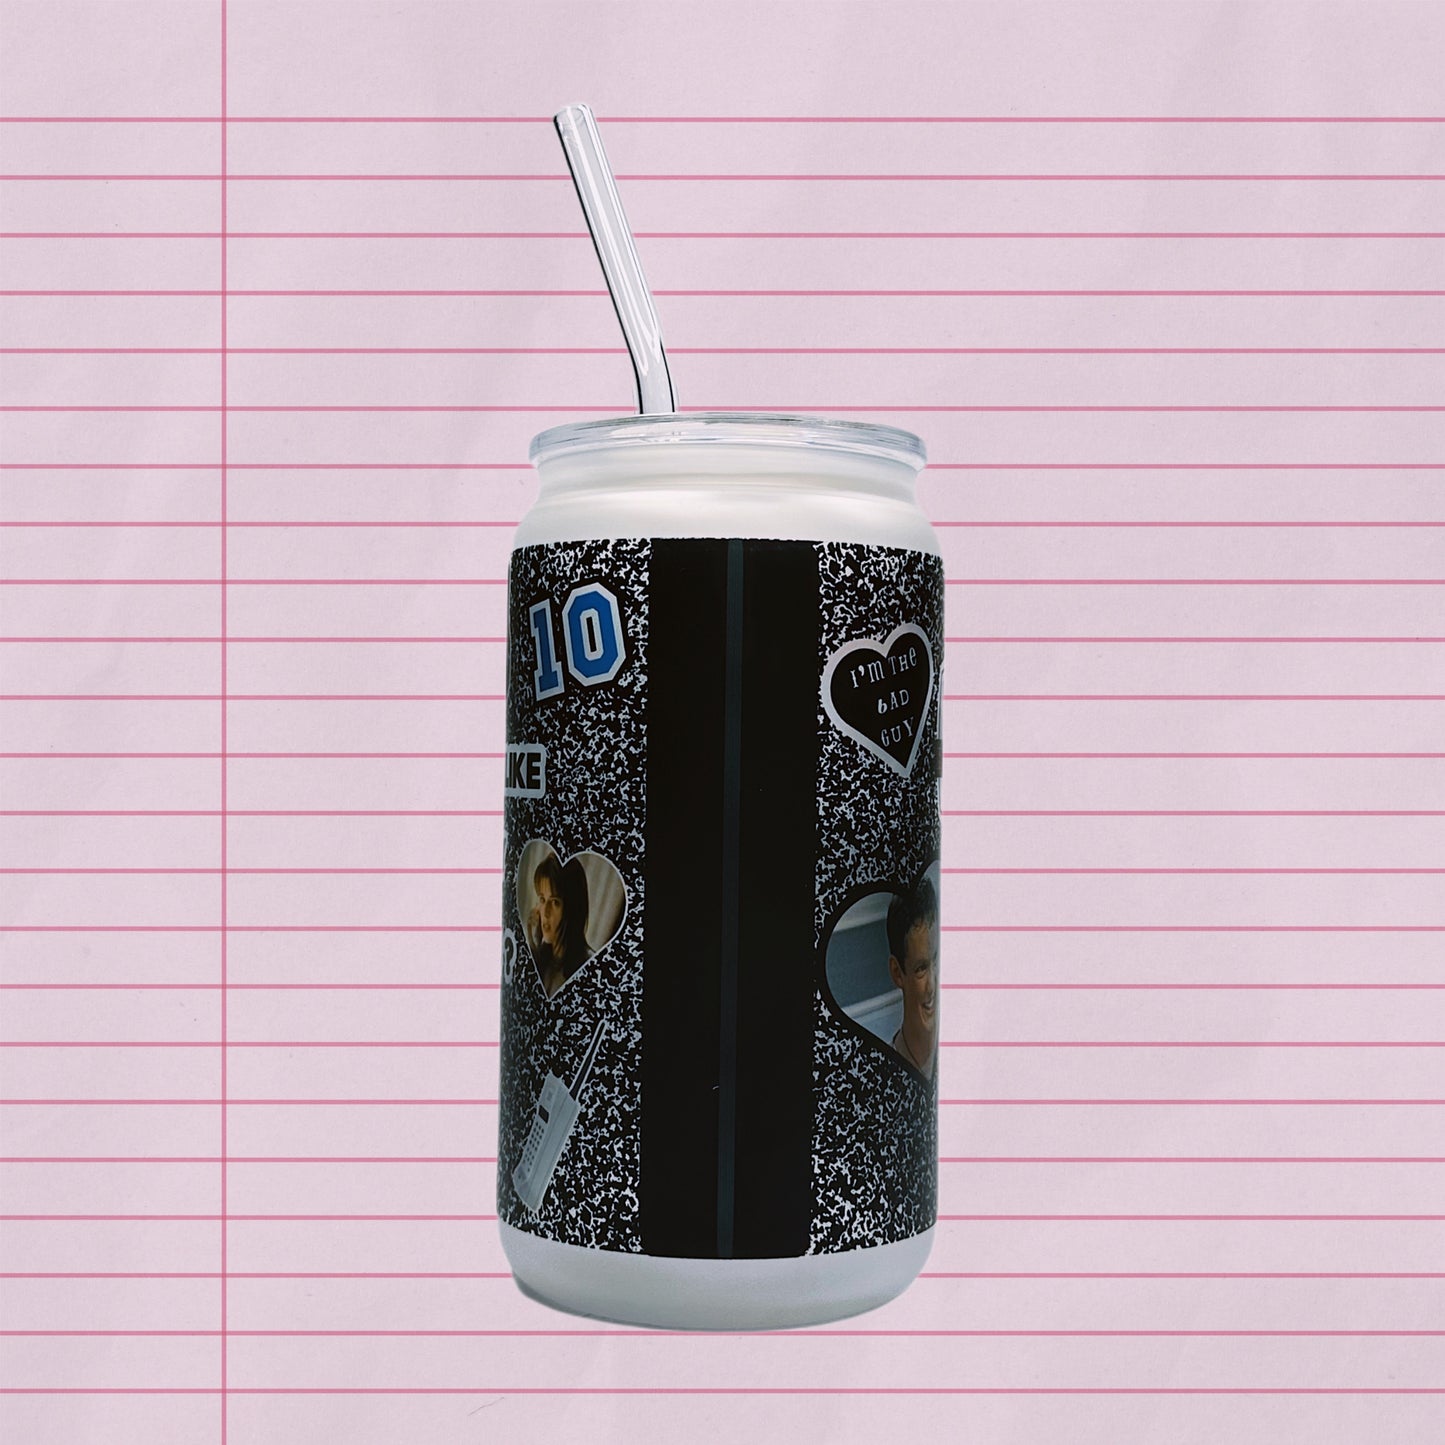 Composition Notebook 16oz Cup - SCREAM